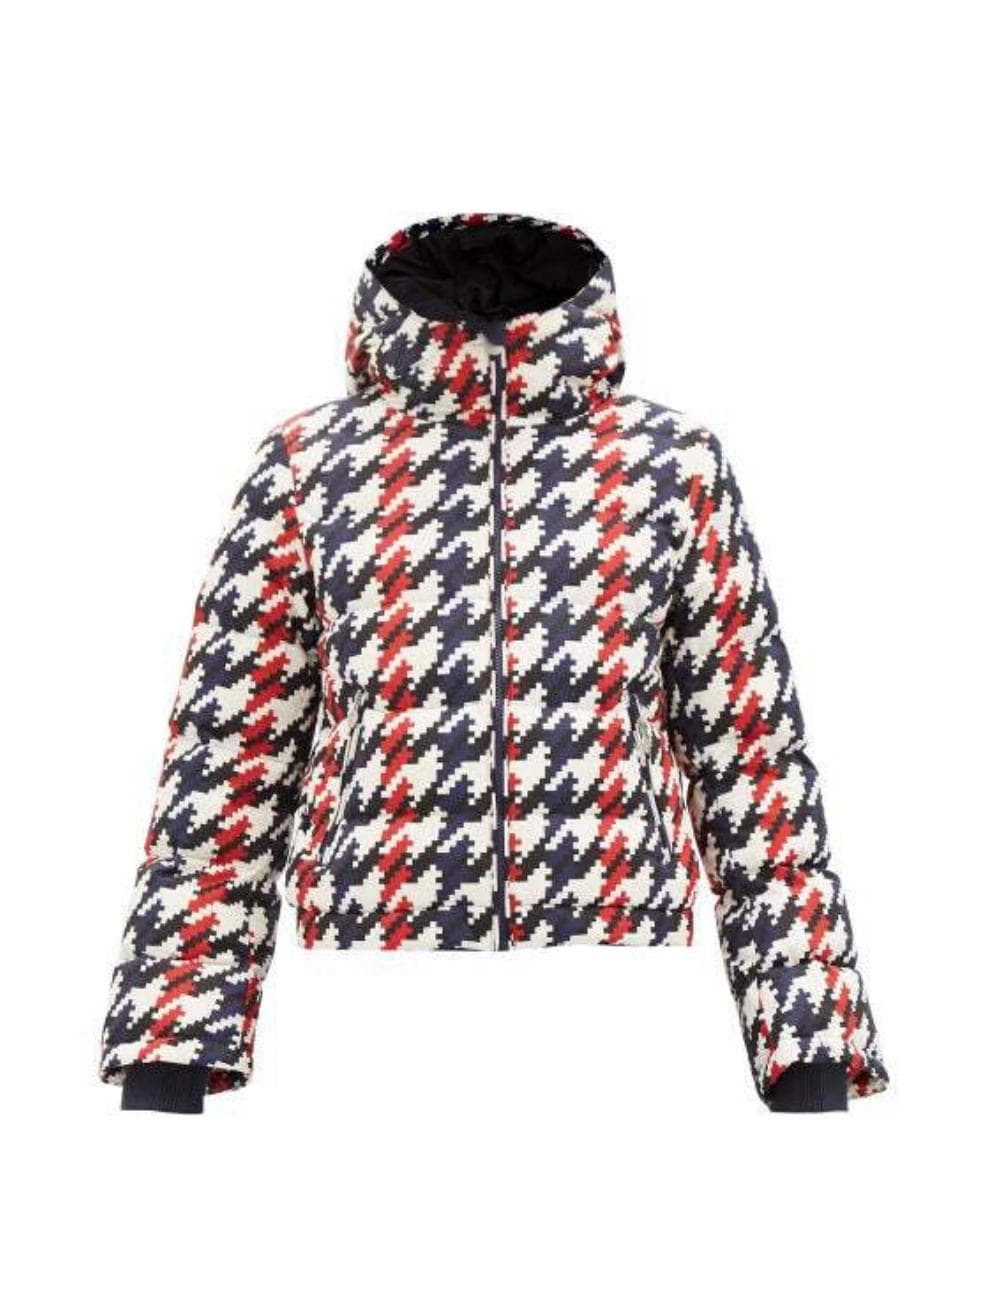 Houndstooth Ski Jacket in Red, White, & Blue